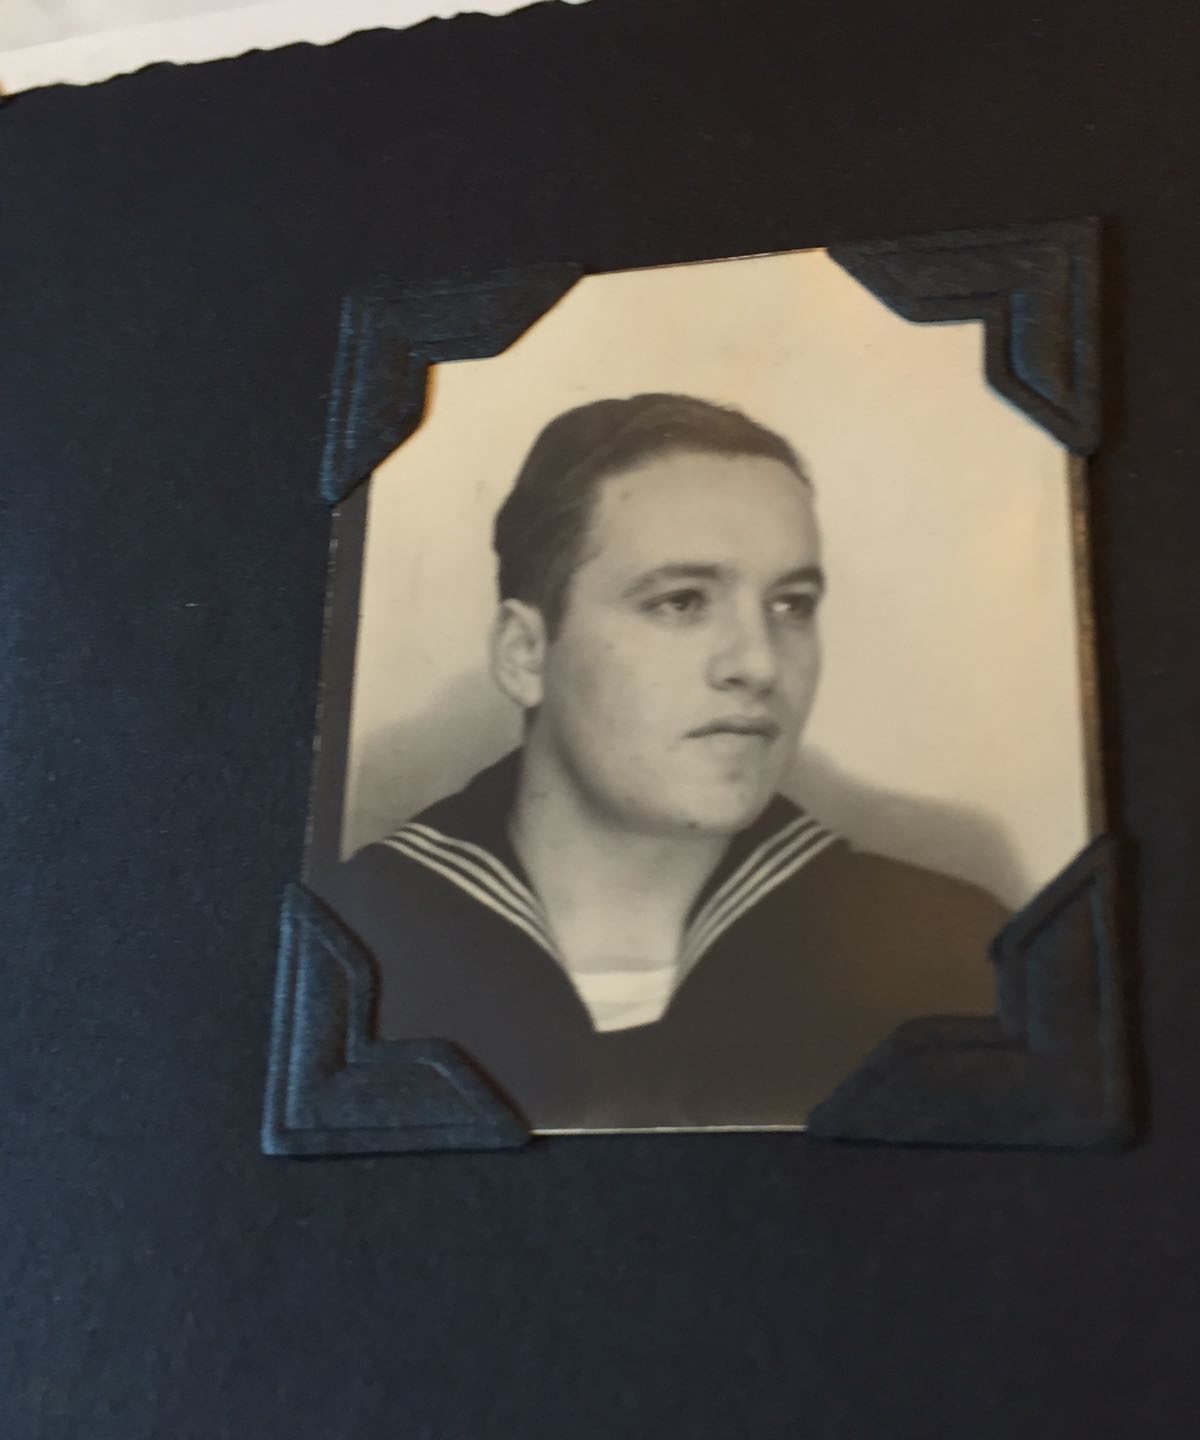 My Father, “The Jew” in The US Navy